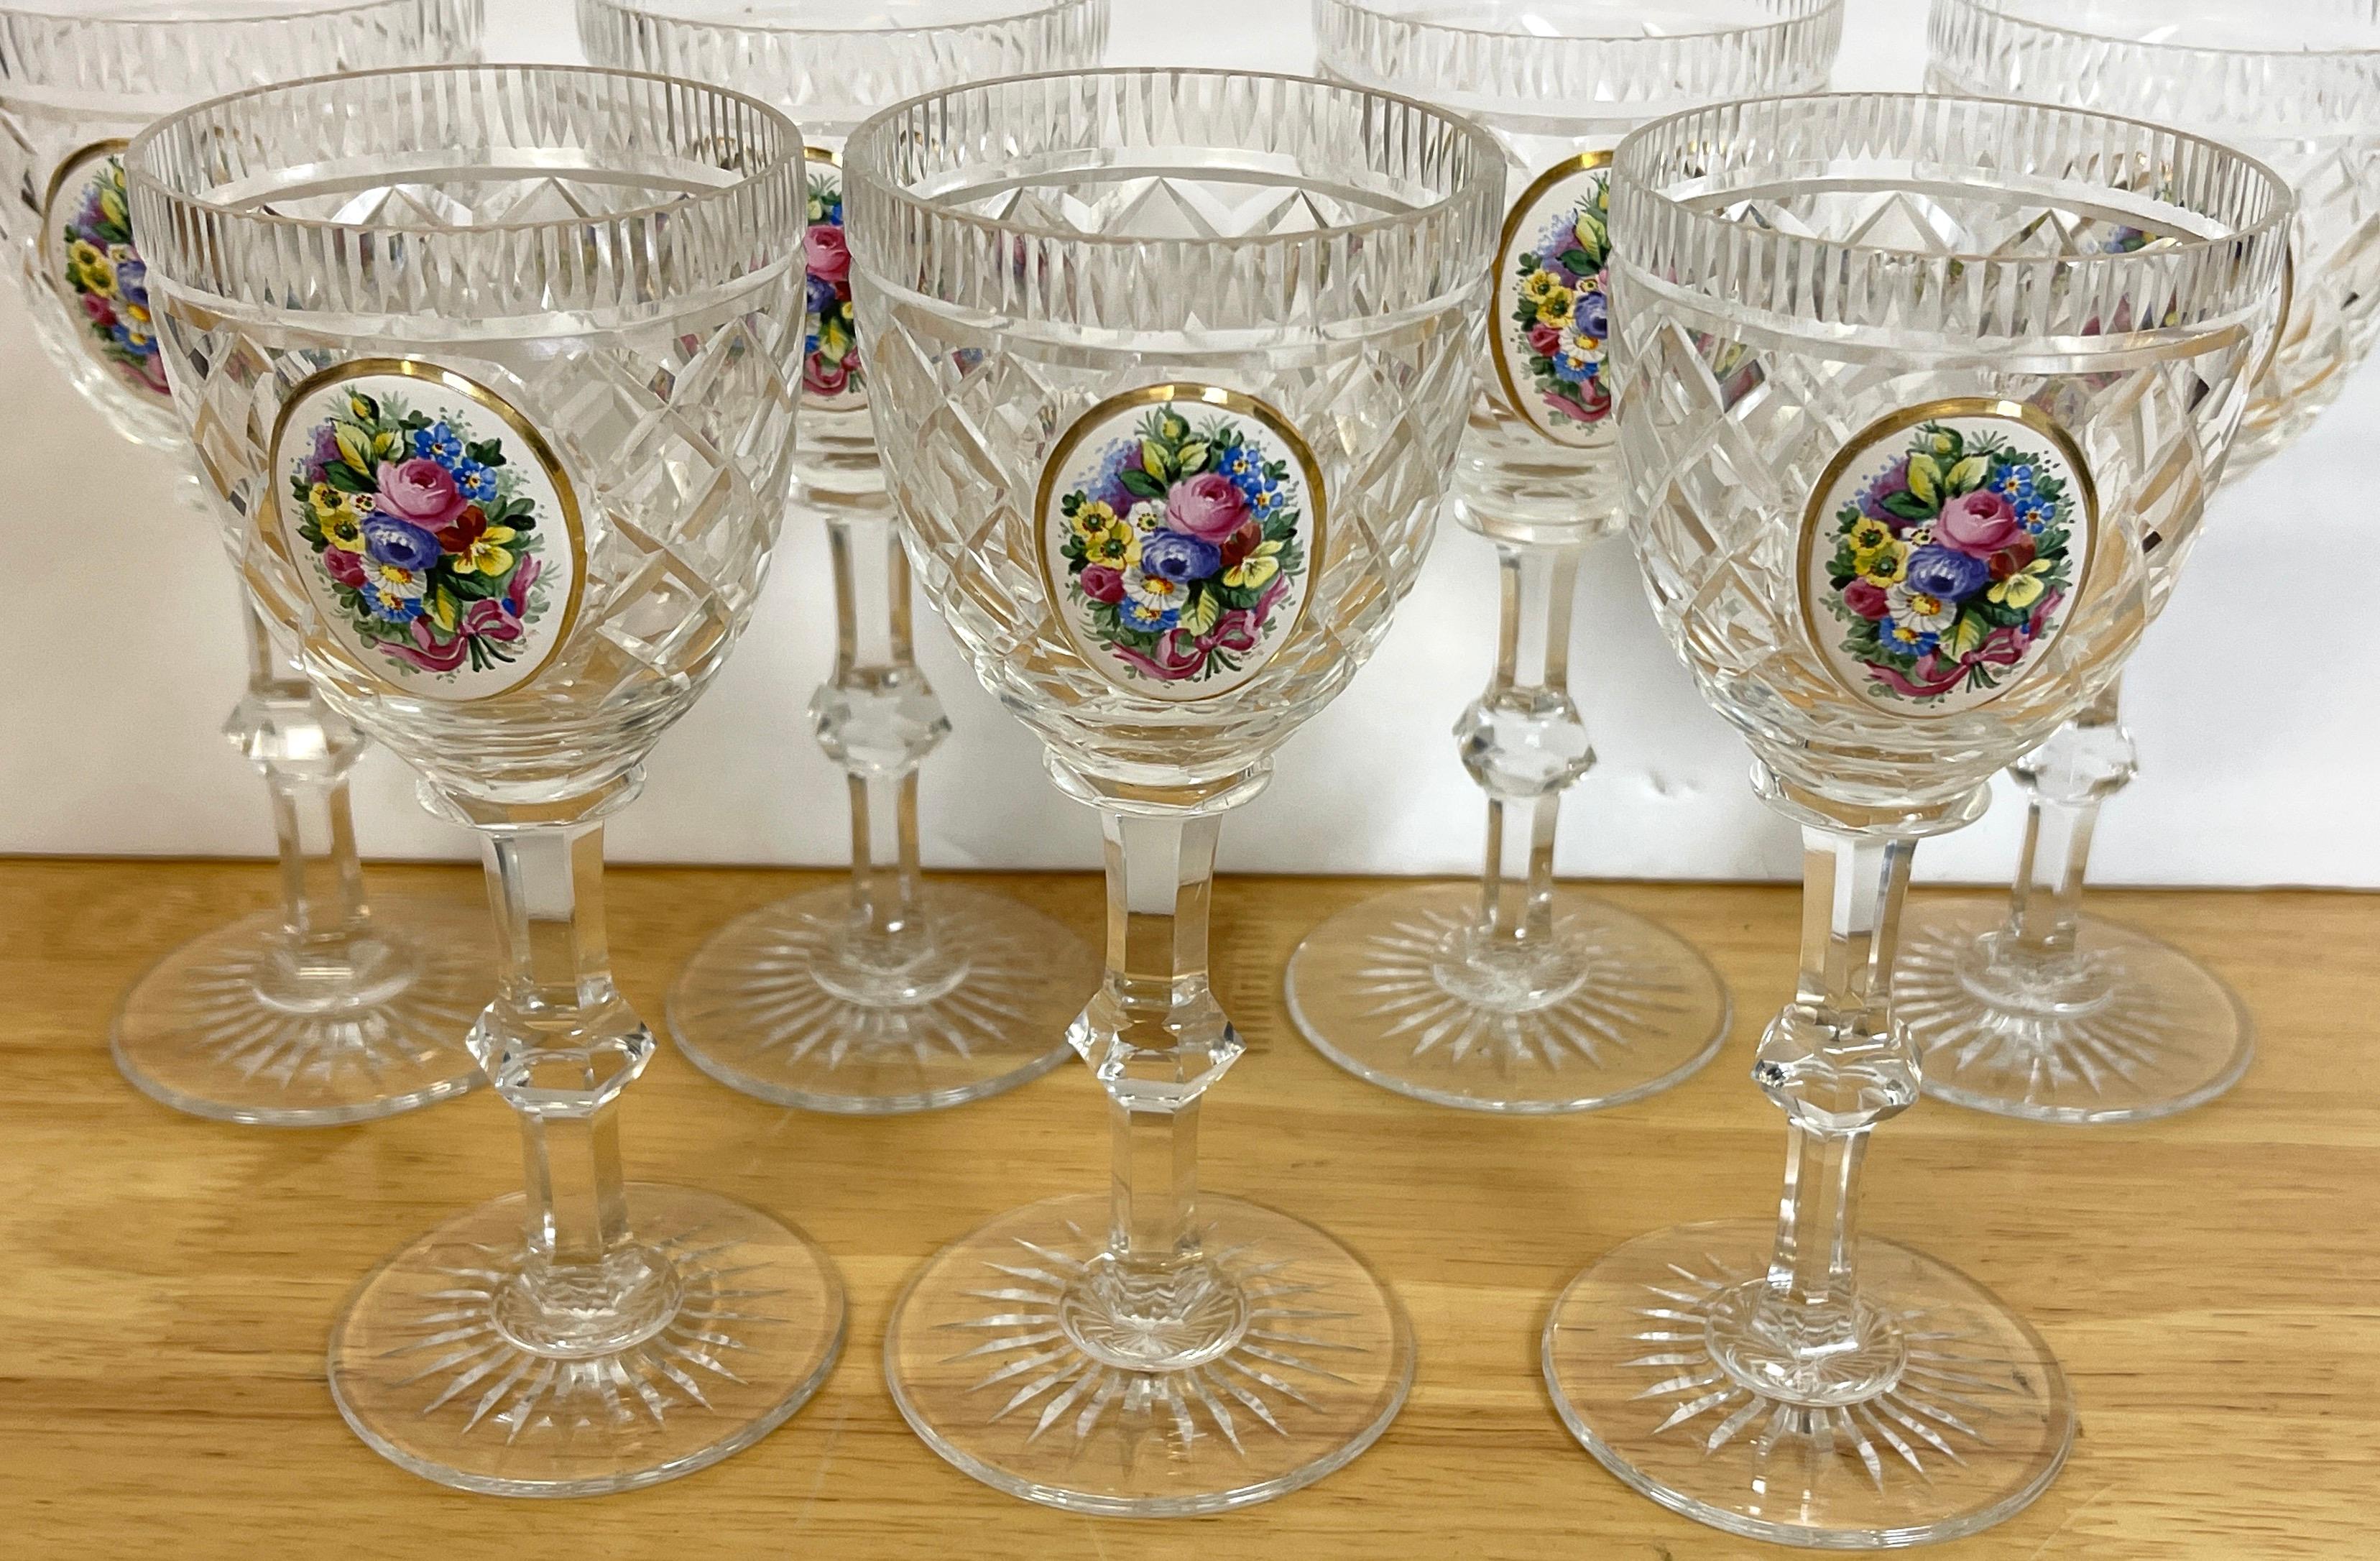 8 Exquisite Moser Floral Enameled Cut to Clear Enamel Glasses In Good Condition For Sale In West Palm Beach, FL